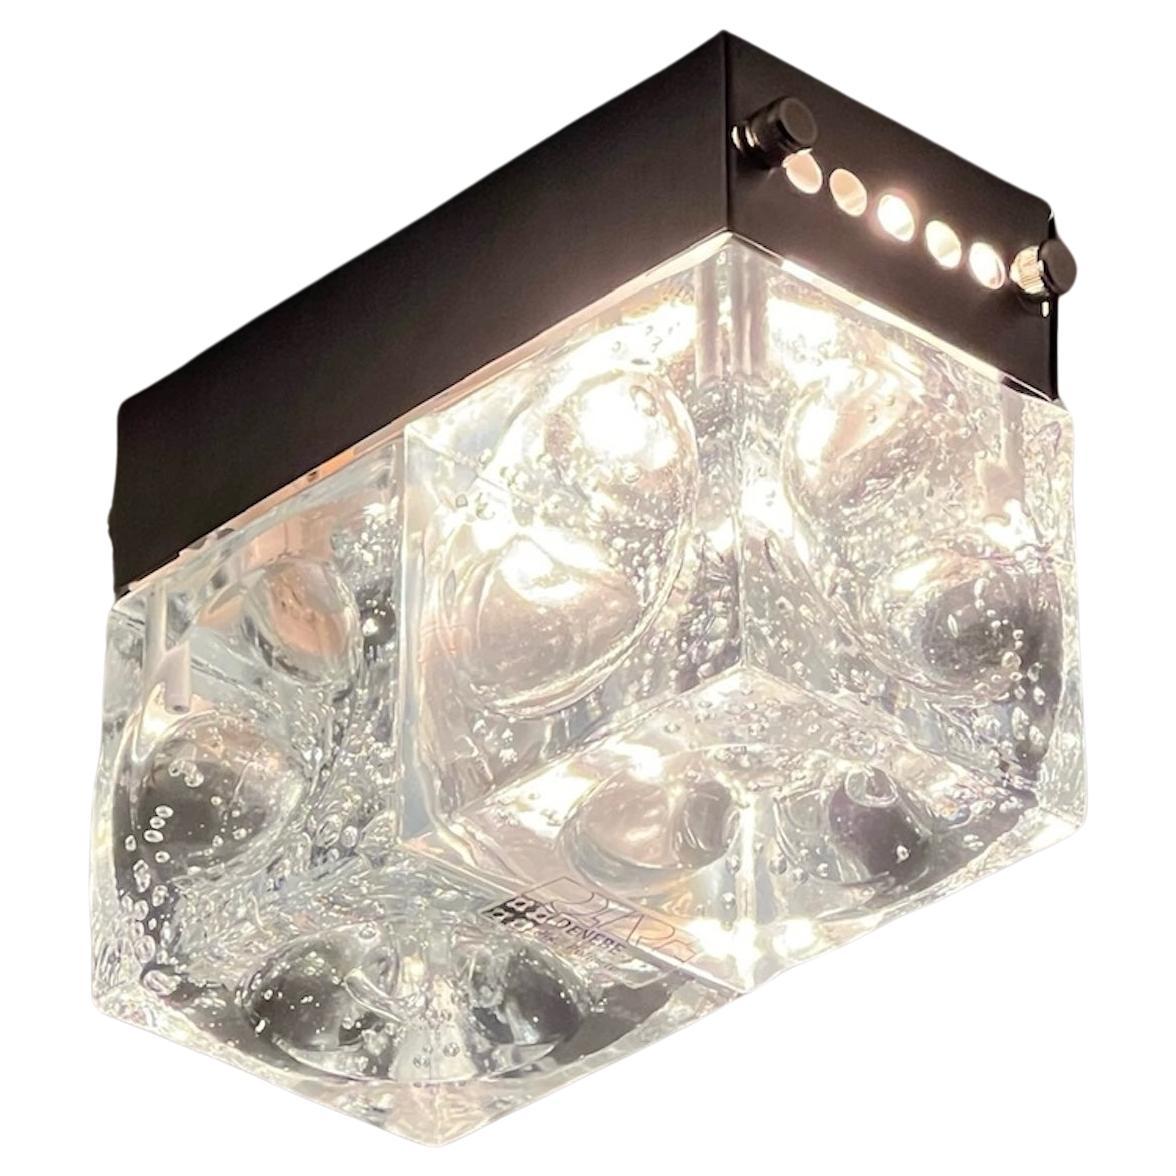 Iconic Poliarte Lamp 'Denebe' - Handmade Glass Cubes Made in Italy For Sale